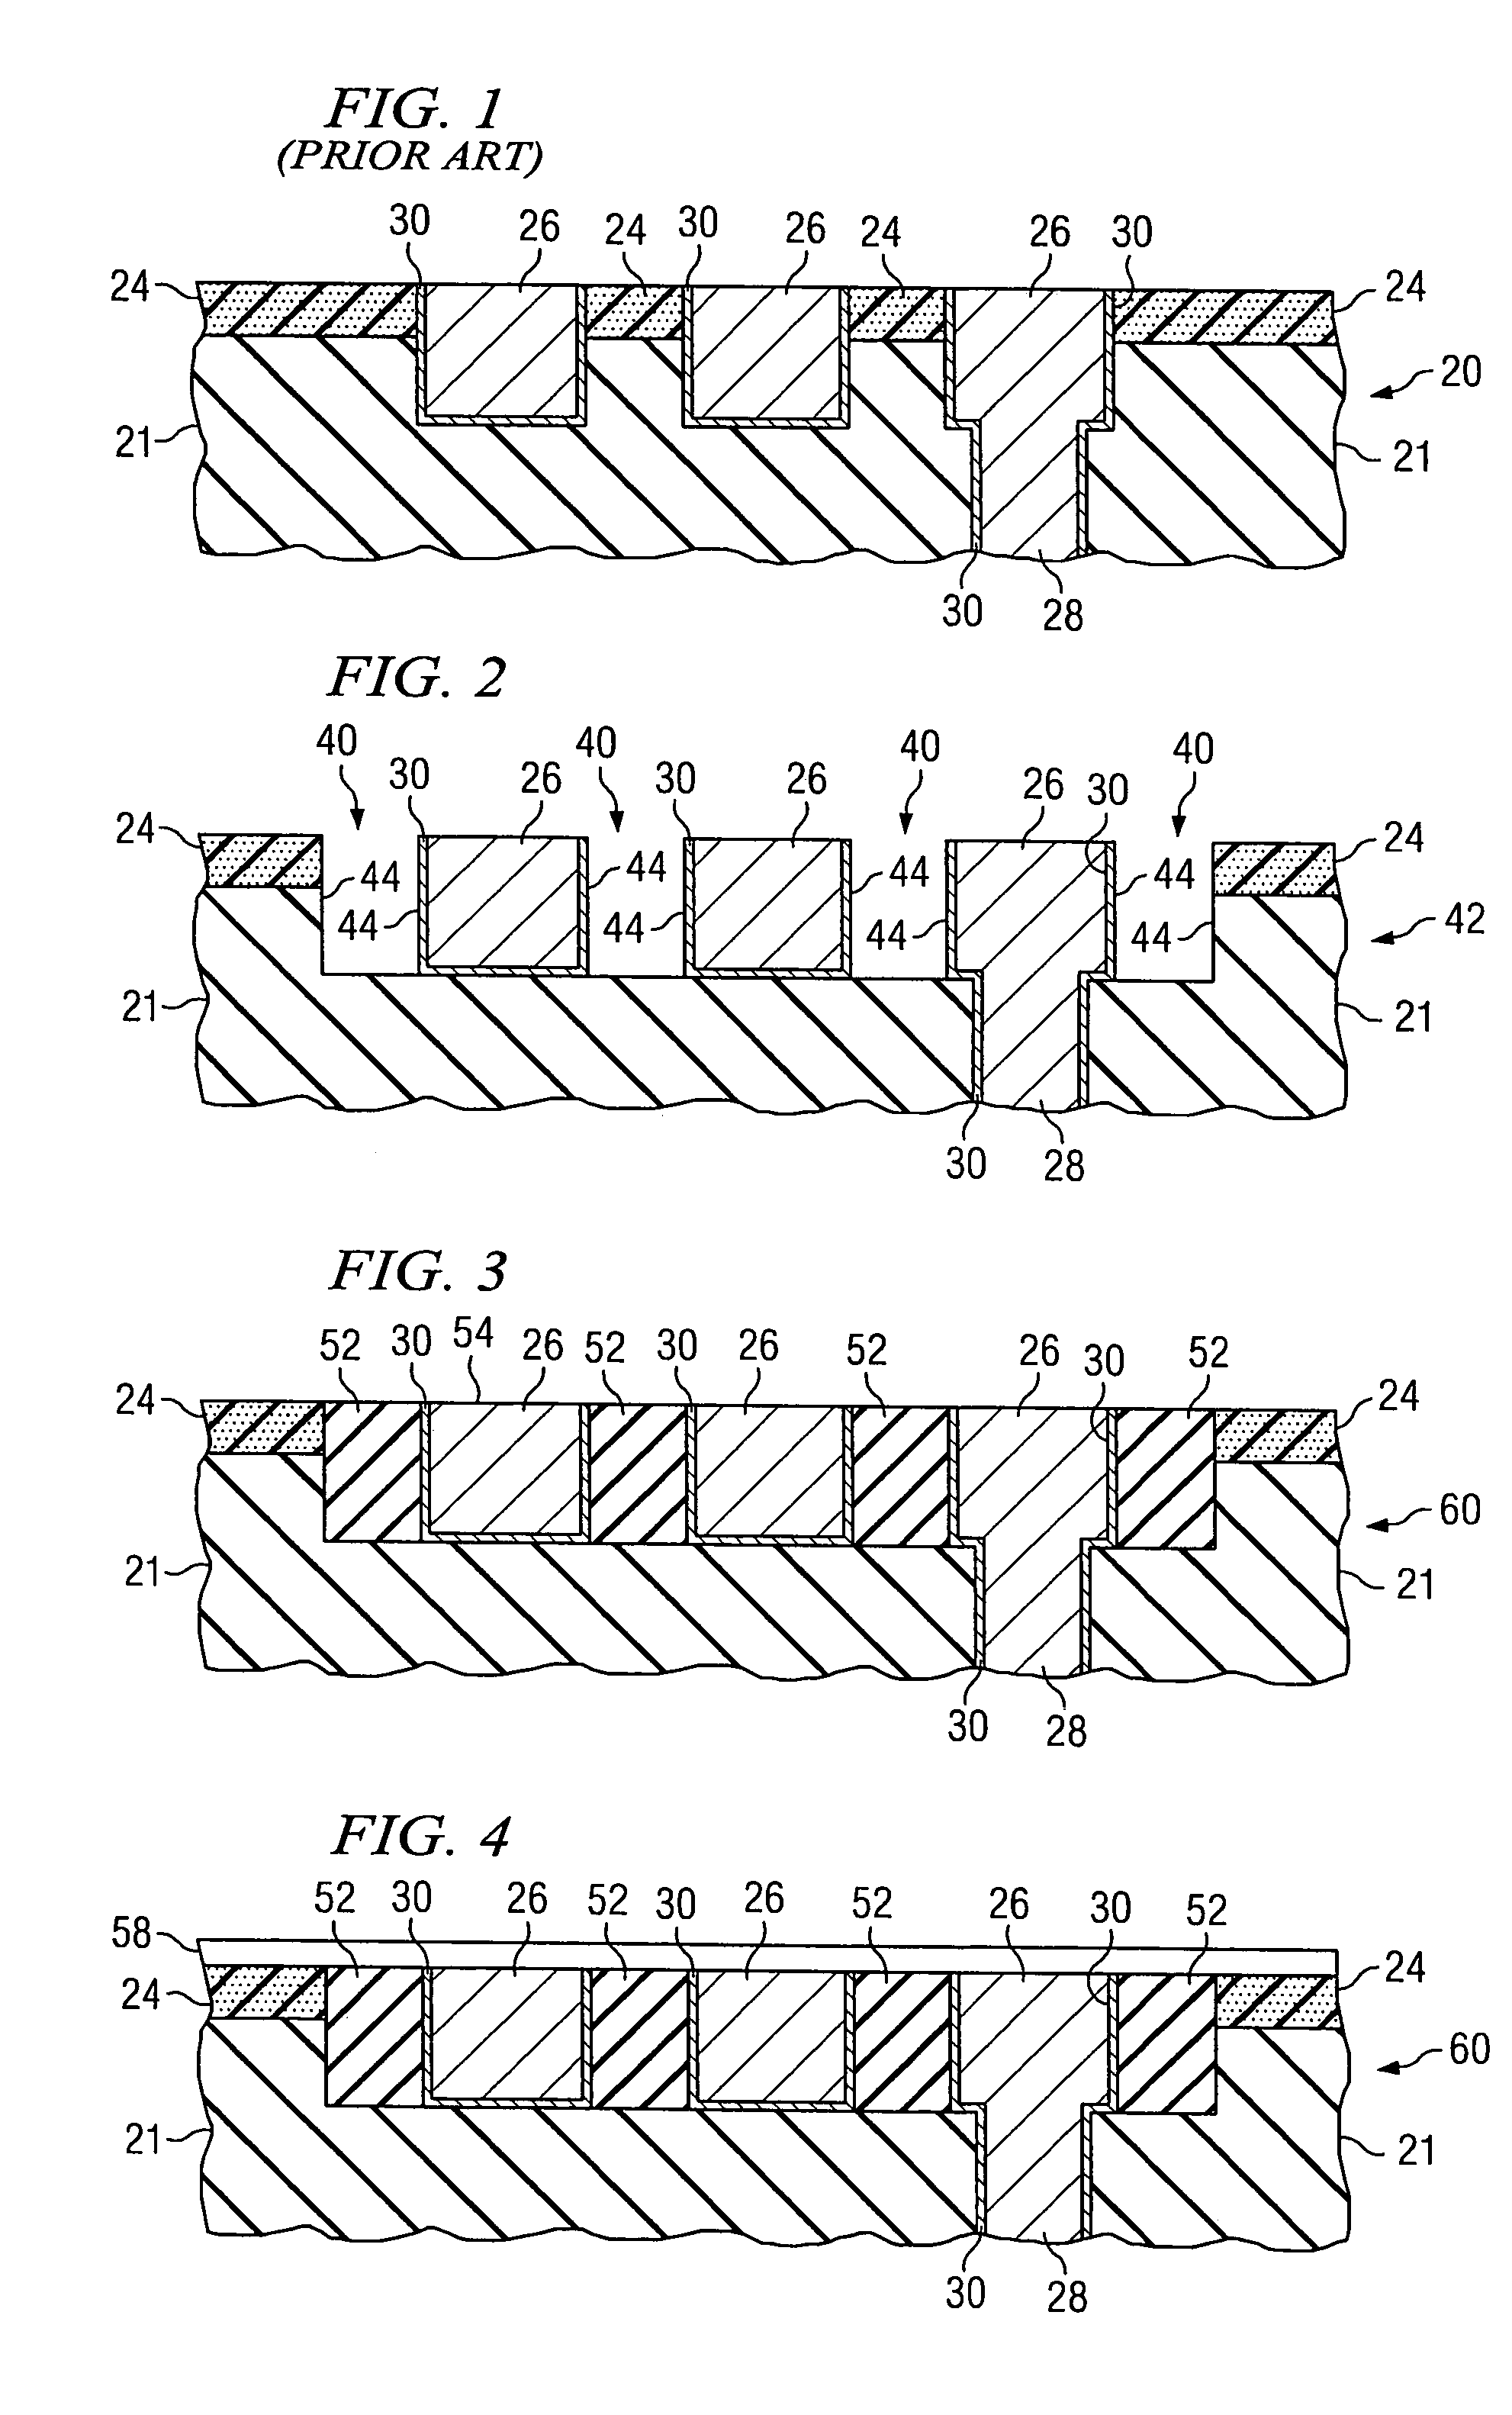 Composite intermetal dielectric structure including low-k dielectric material